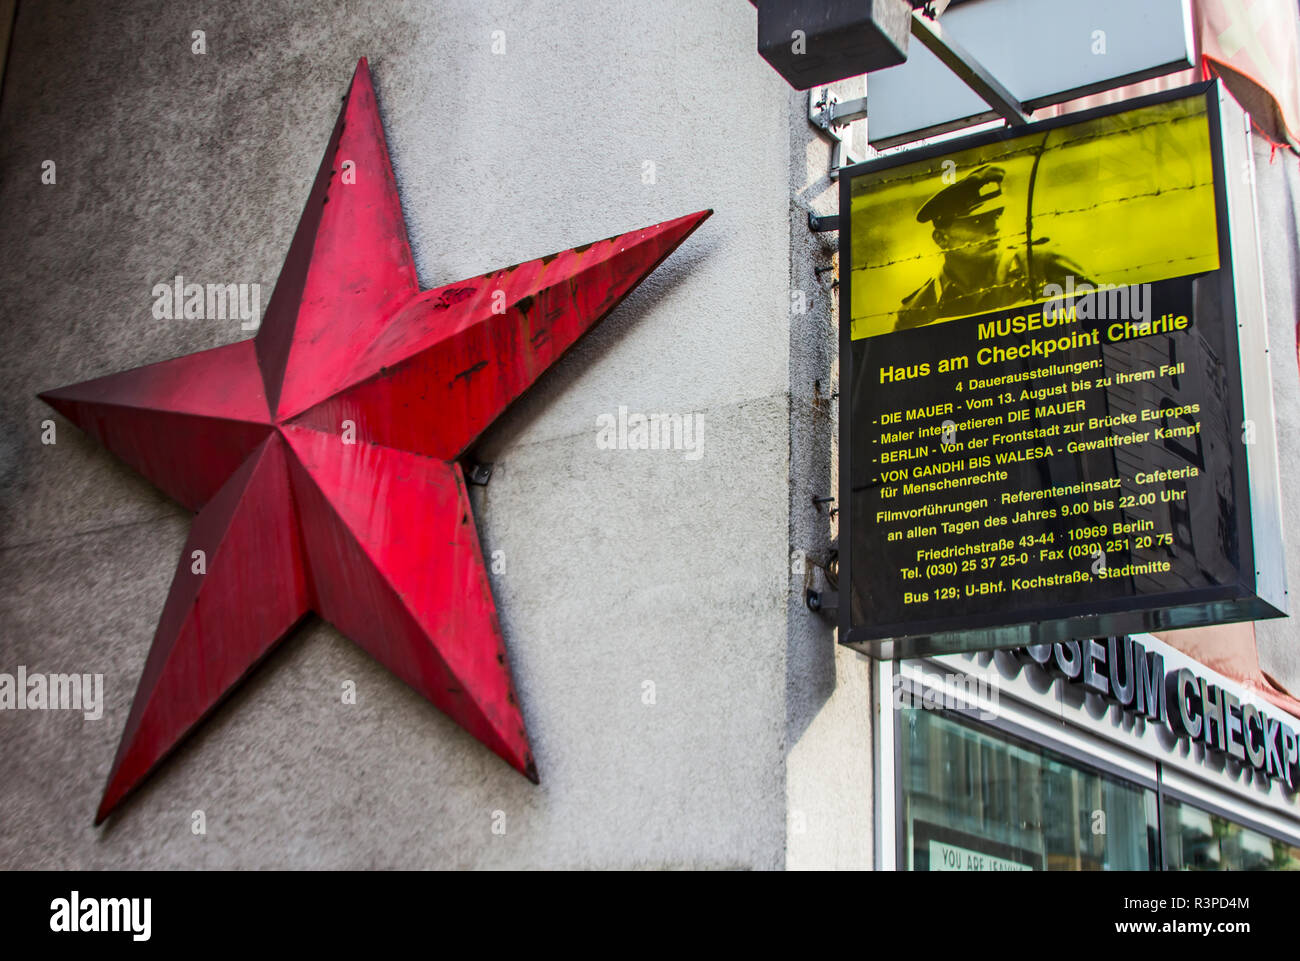 Berlin, Germany. Entrance to the Check Point Charlie Museum is adorned with the large metal red Russian Star of the Soviet Union and sign. Stock Photo